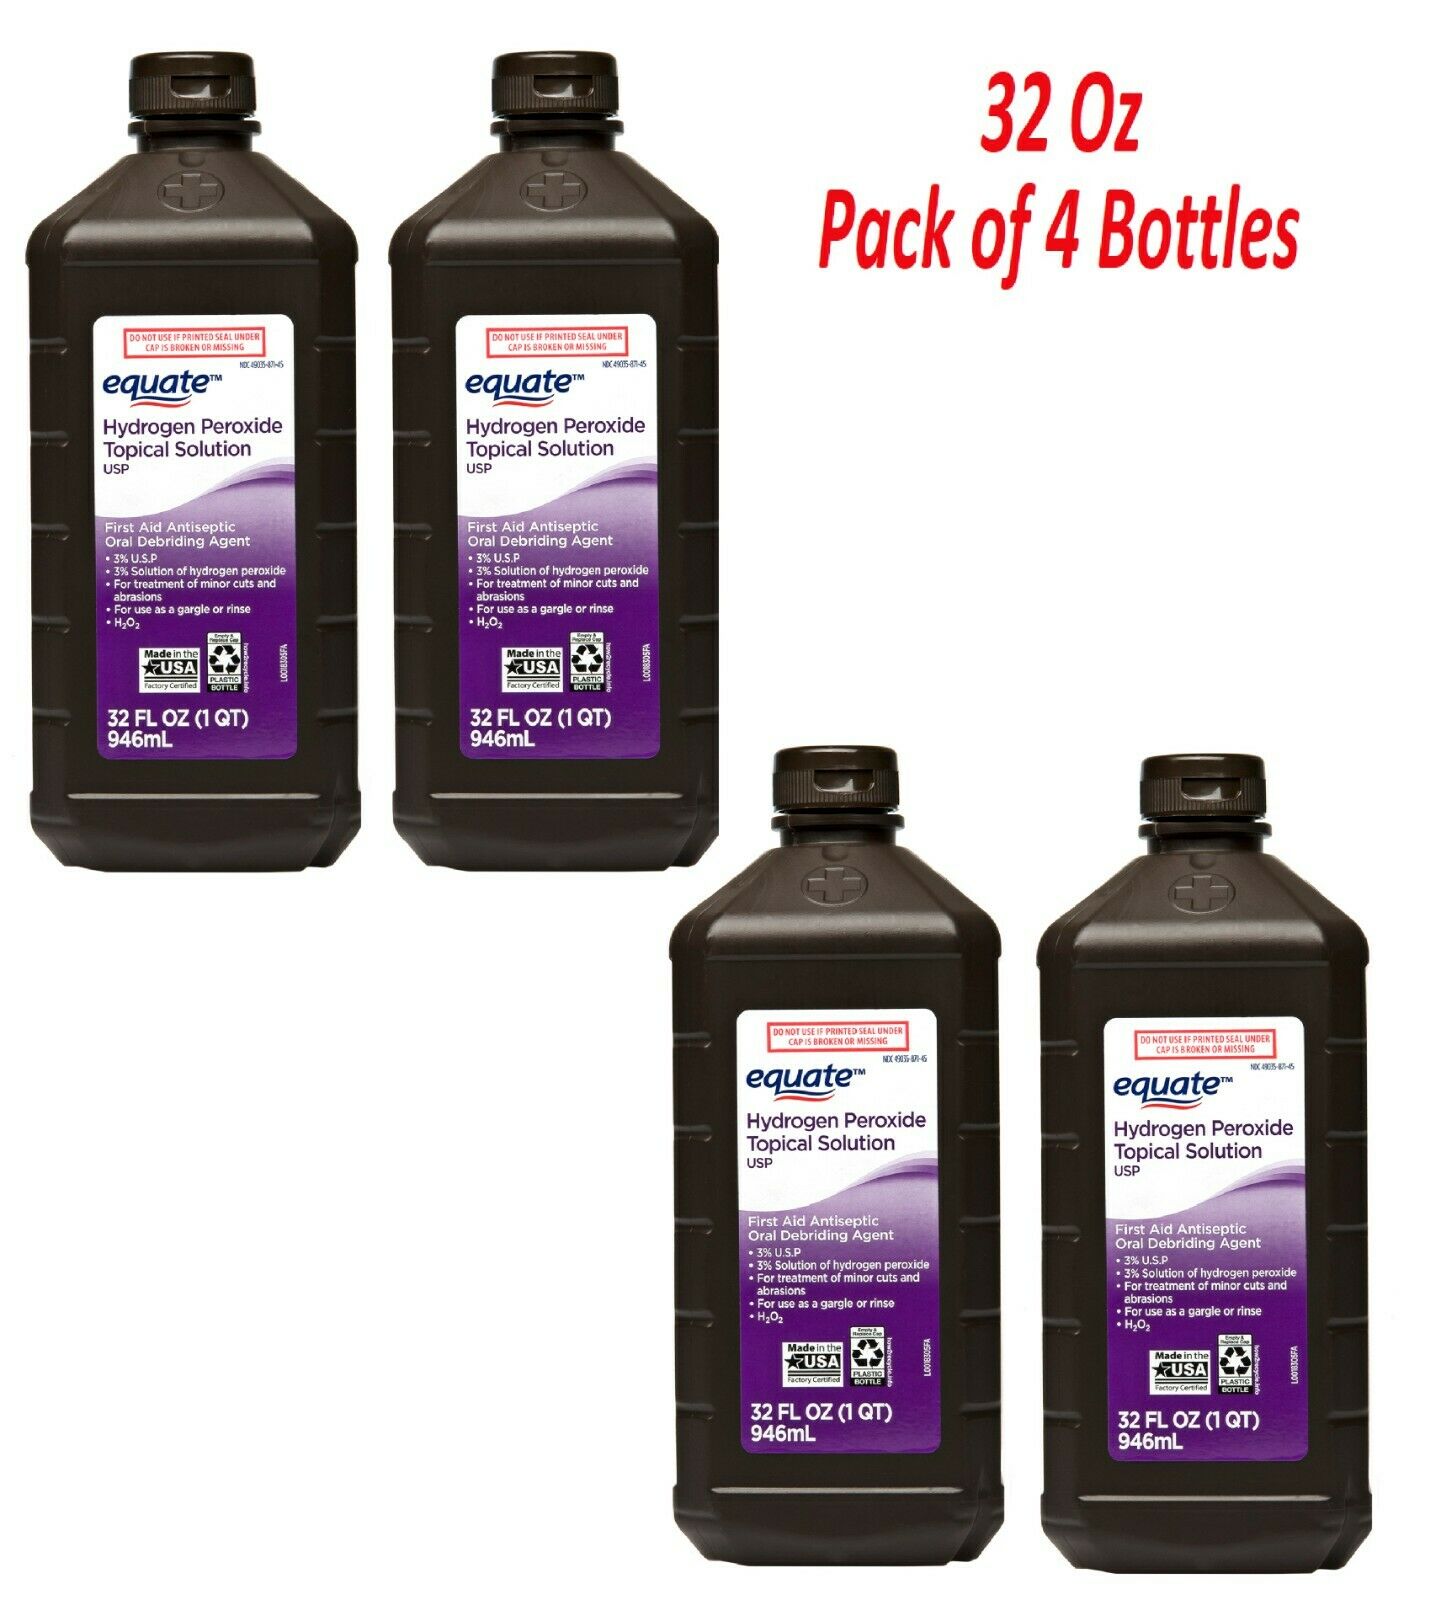 Equate 3% Hydrogen Peroxide Topical Solution, 32 Fl Oz 4 Pack